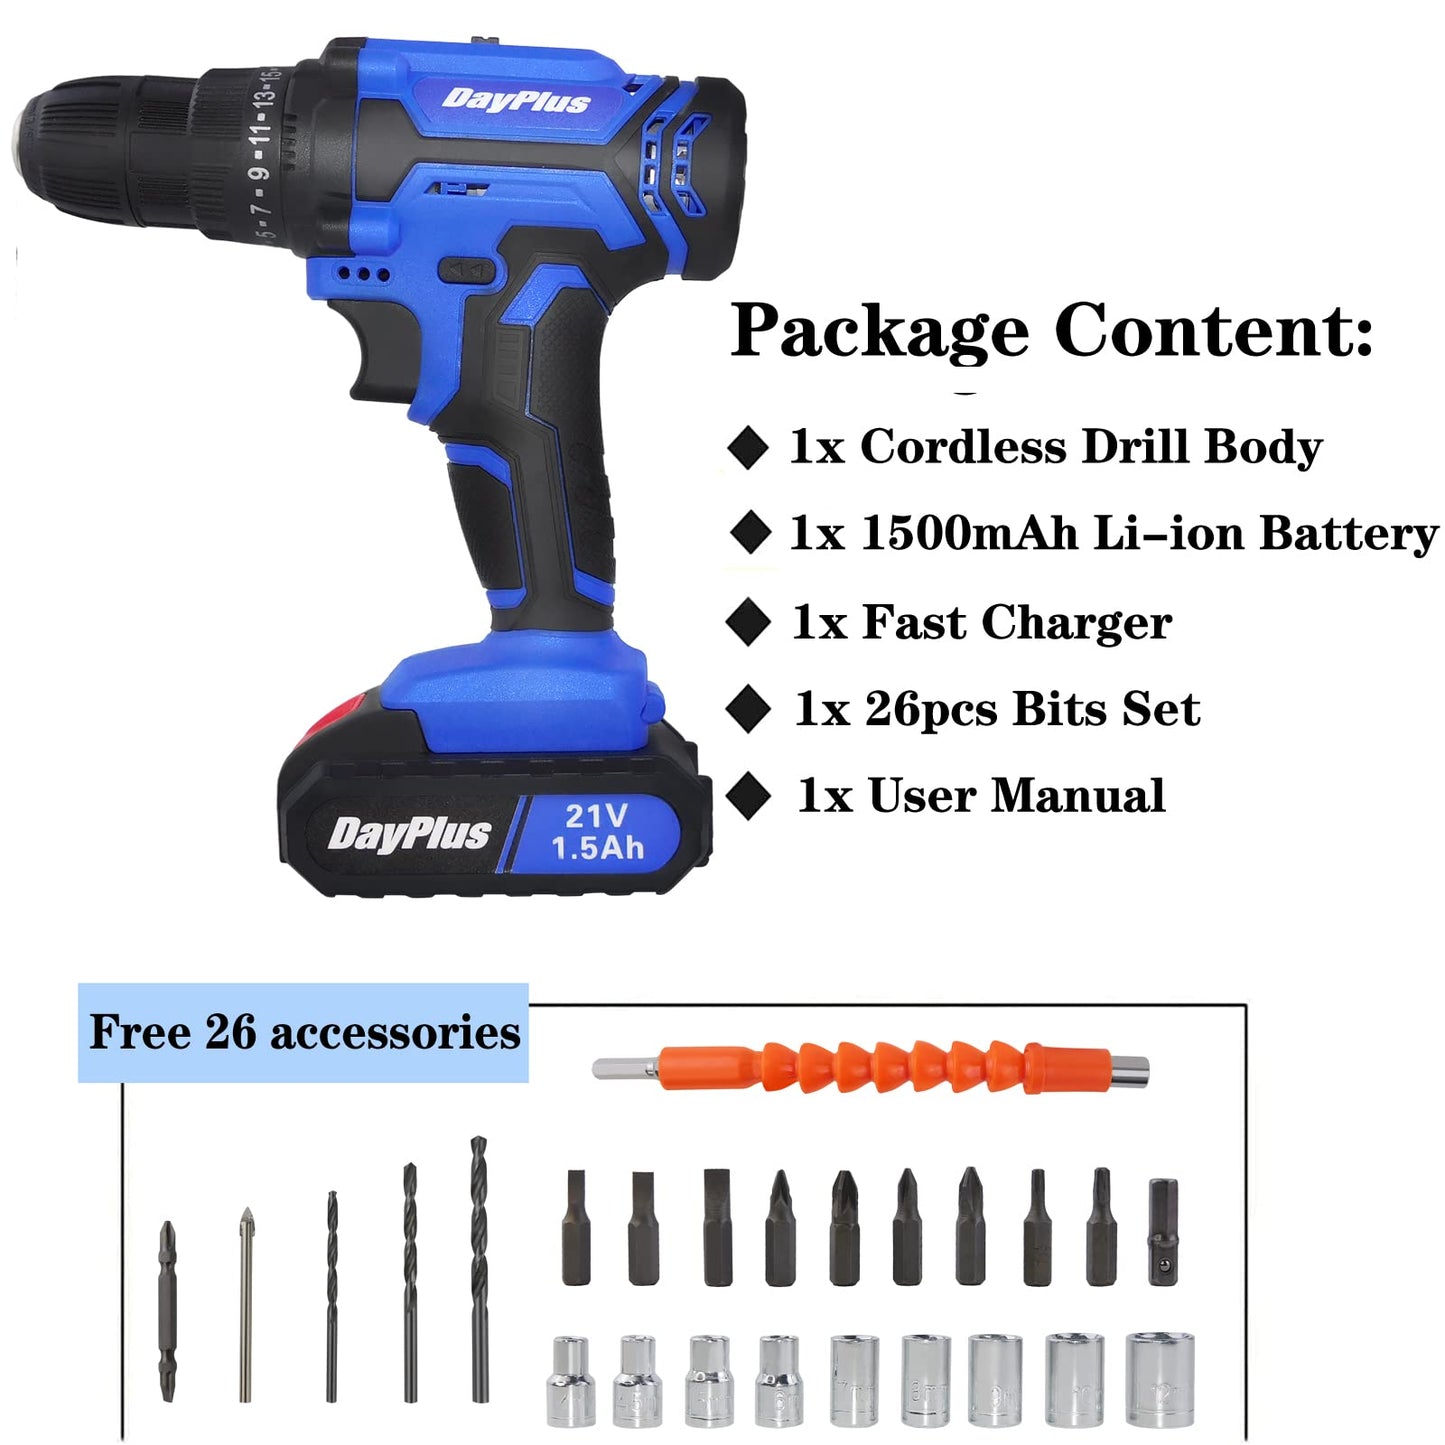 Electric Power Tool Combo Kits Power Drill Driver Set, 3/8-Inch Chuck Power Drill Set, 2 Variable Speed Electric Drill Driver, 25+1 Torque Setting,